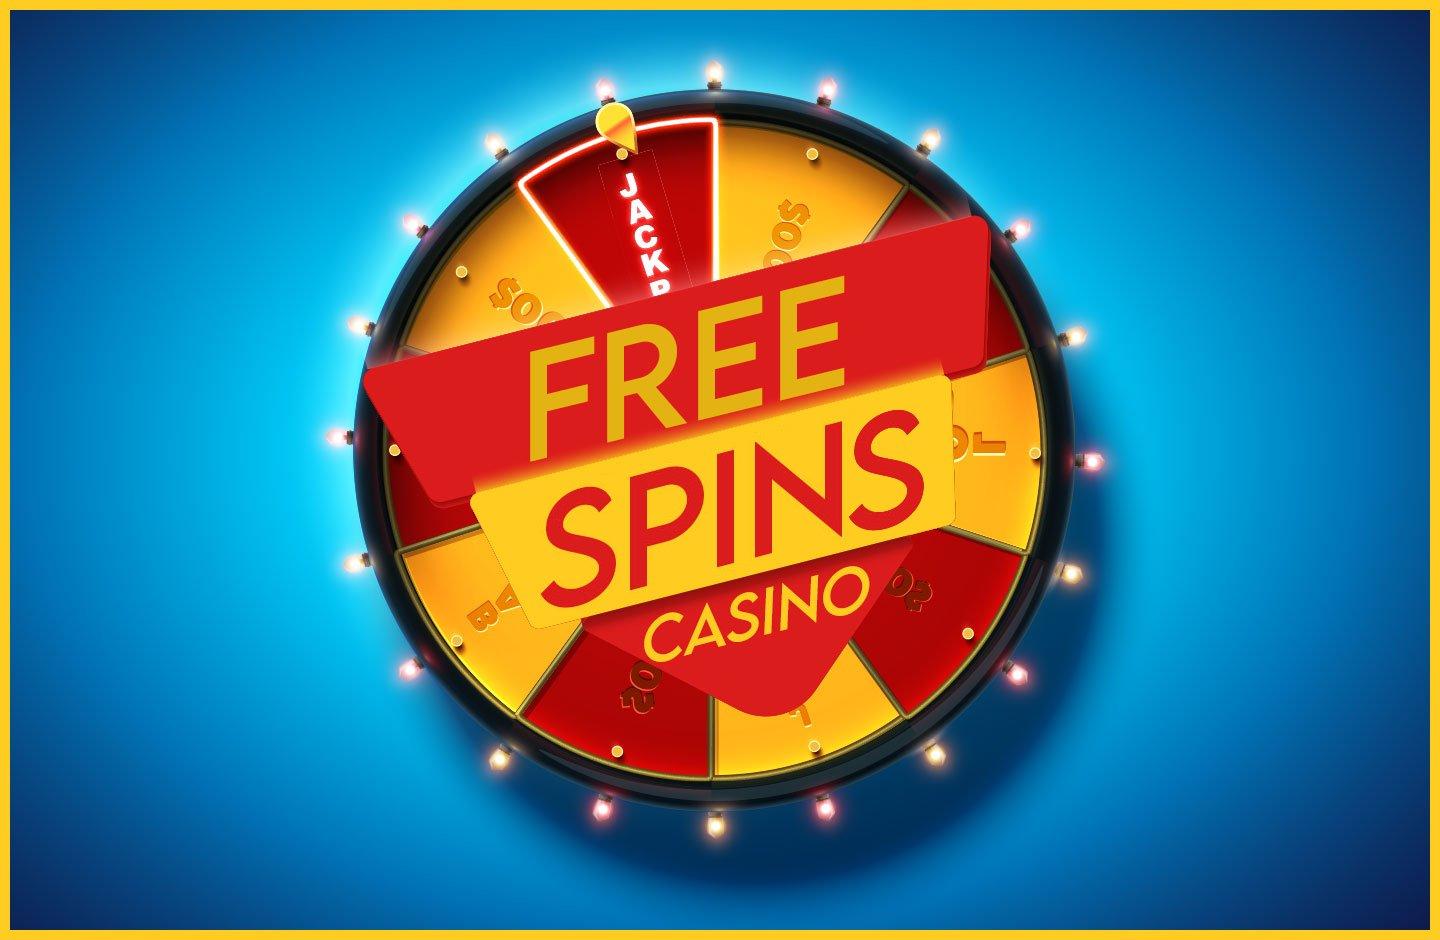 Experience Winning Free Spins No Deposit Not On Gamstop